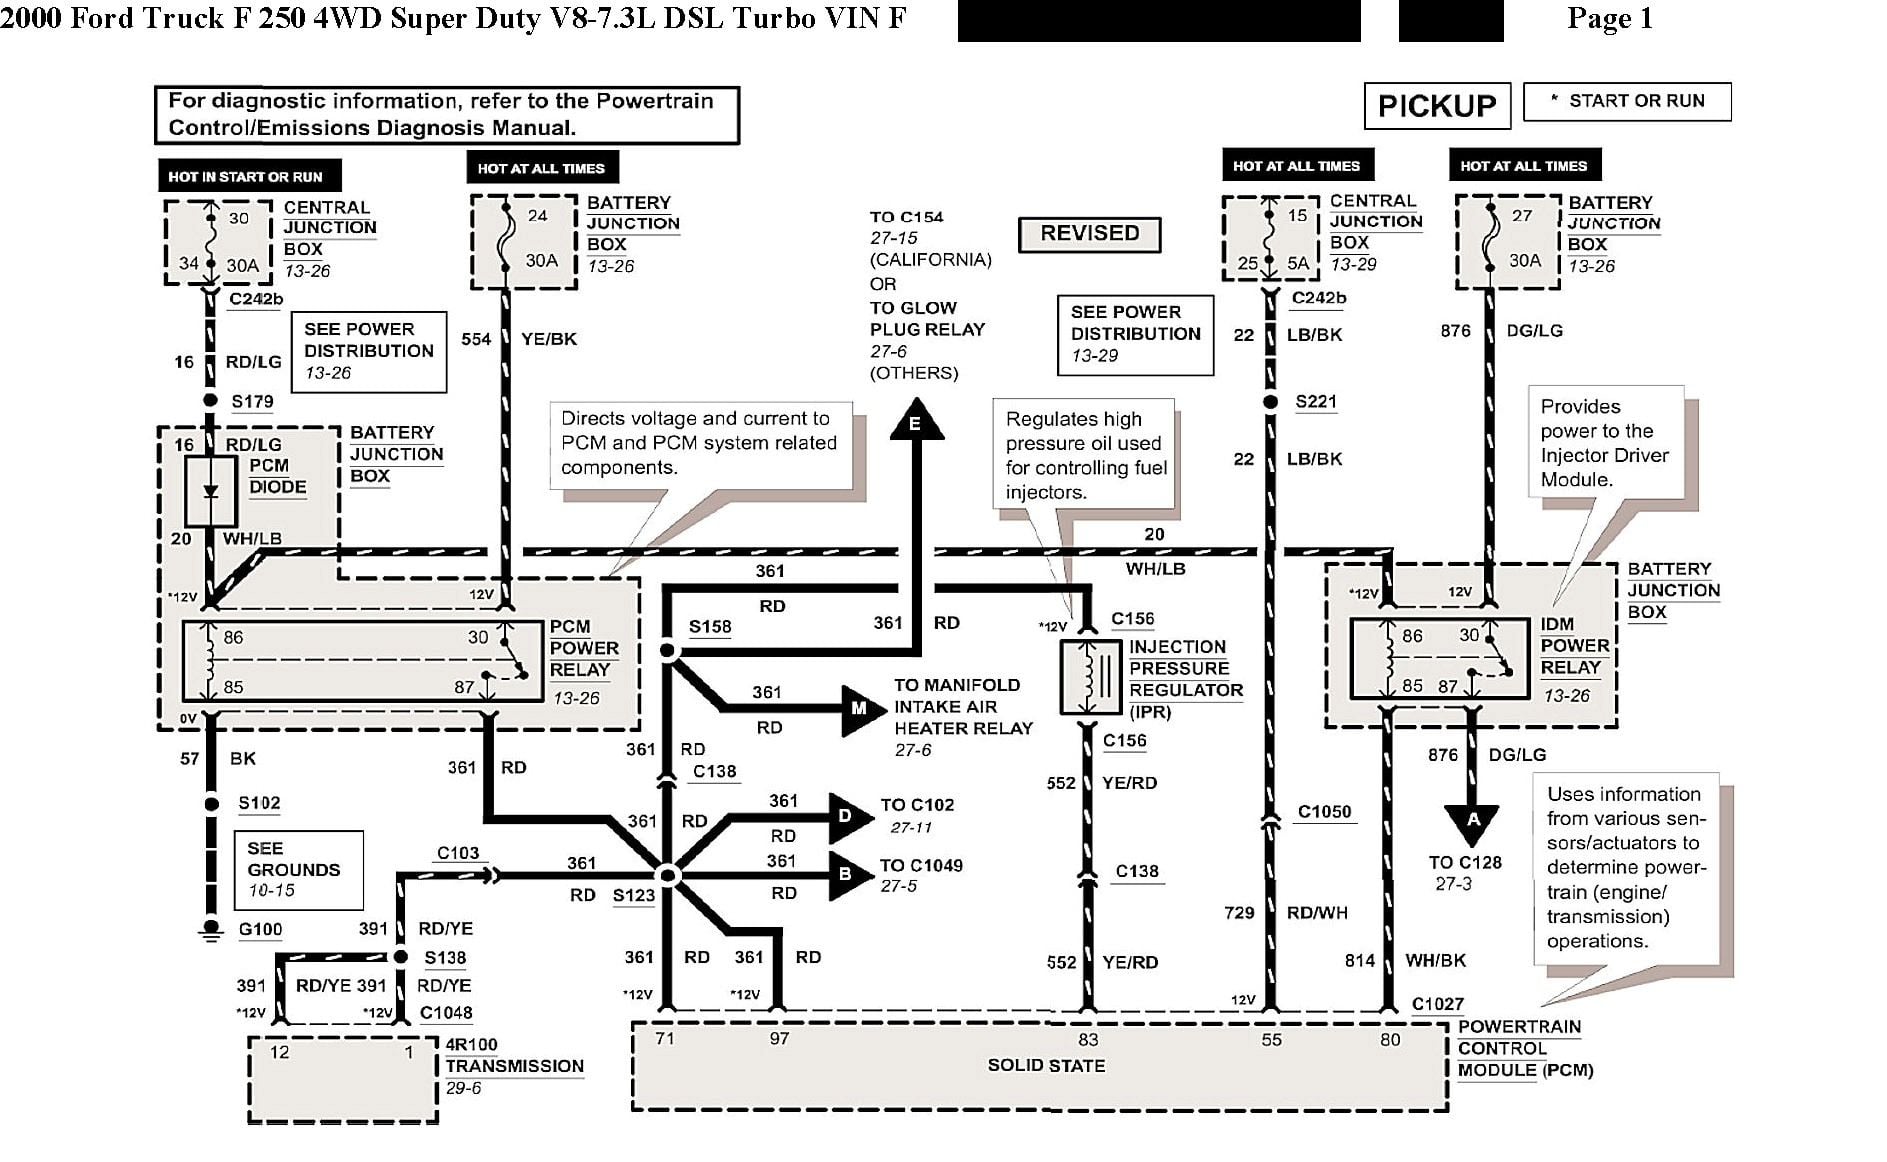 Need IPR wiring info-diagram, quickly please (2000) - Ford Truck  Enthusiasts Forums Toyota Avalon Radio Ford Truck Enthusiasts